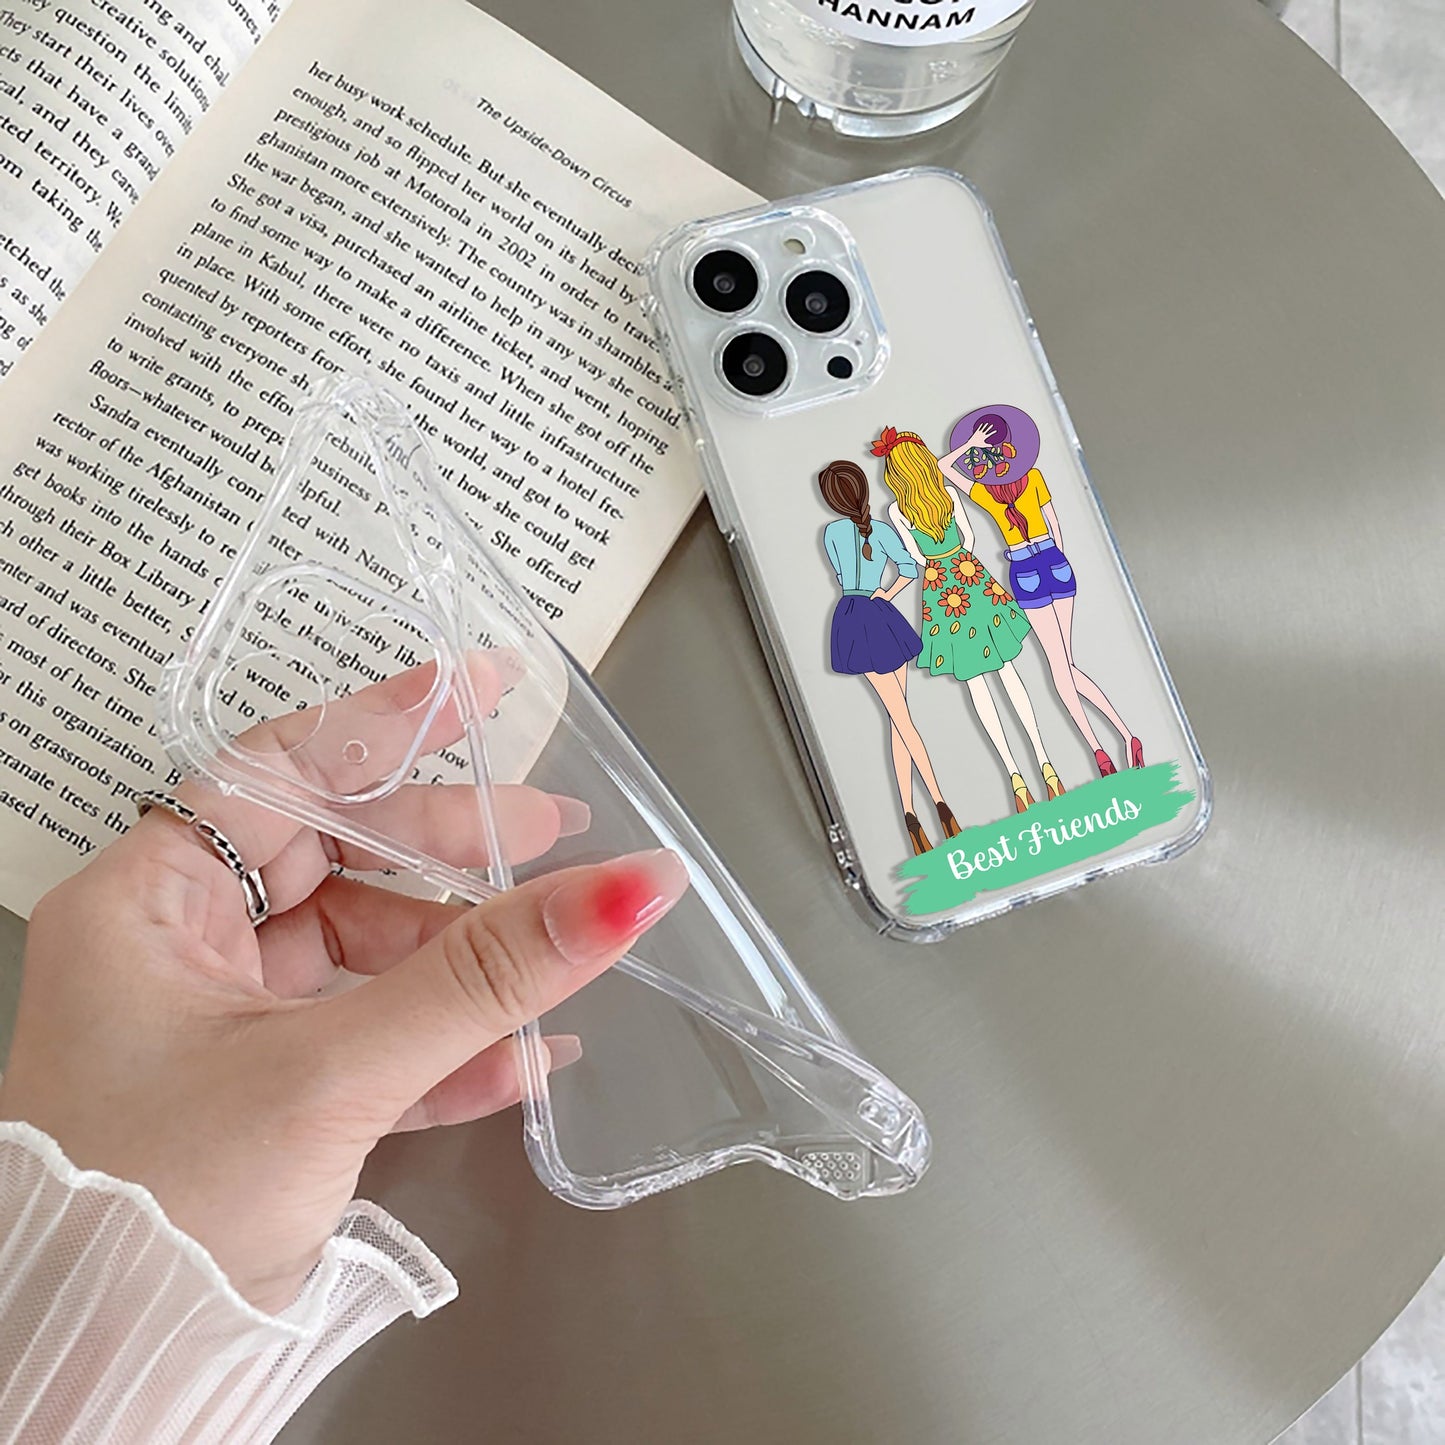 Friends Forever Customize Transparent Silicon Case For Motorola